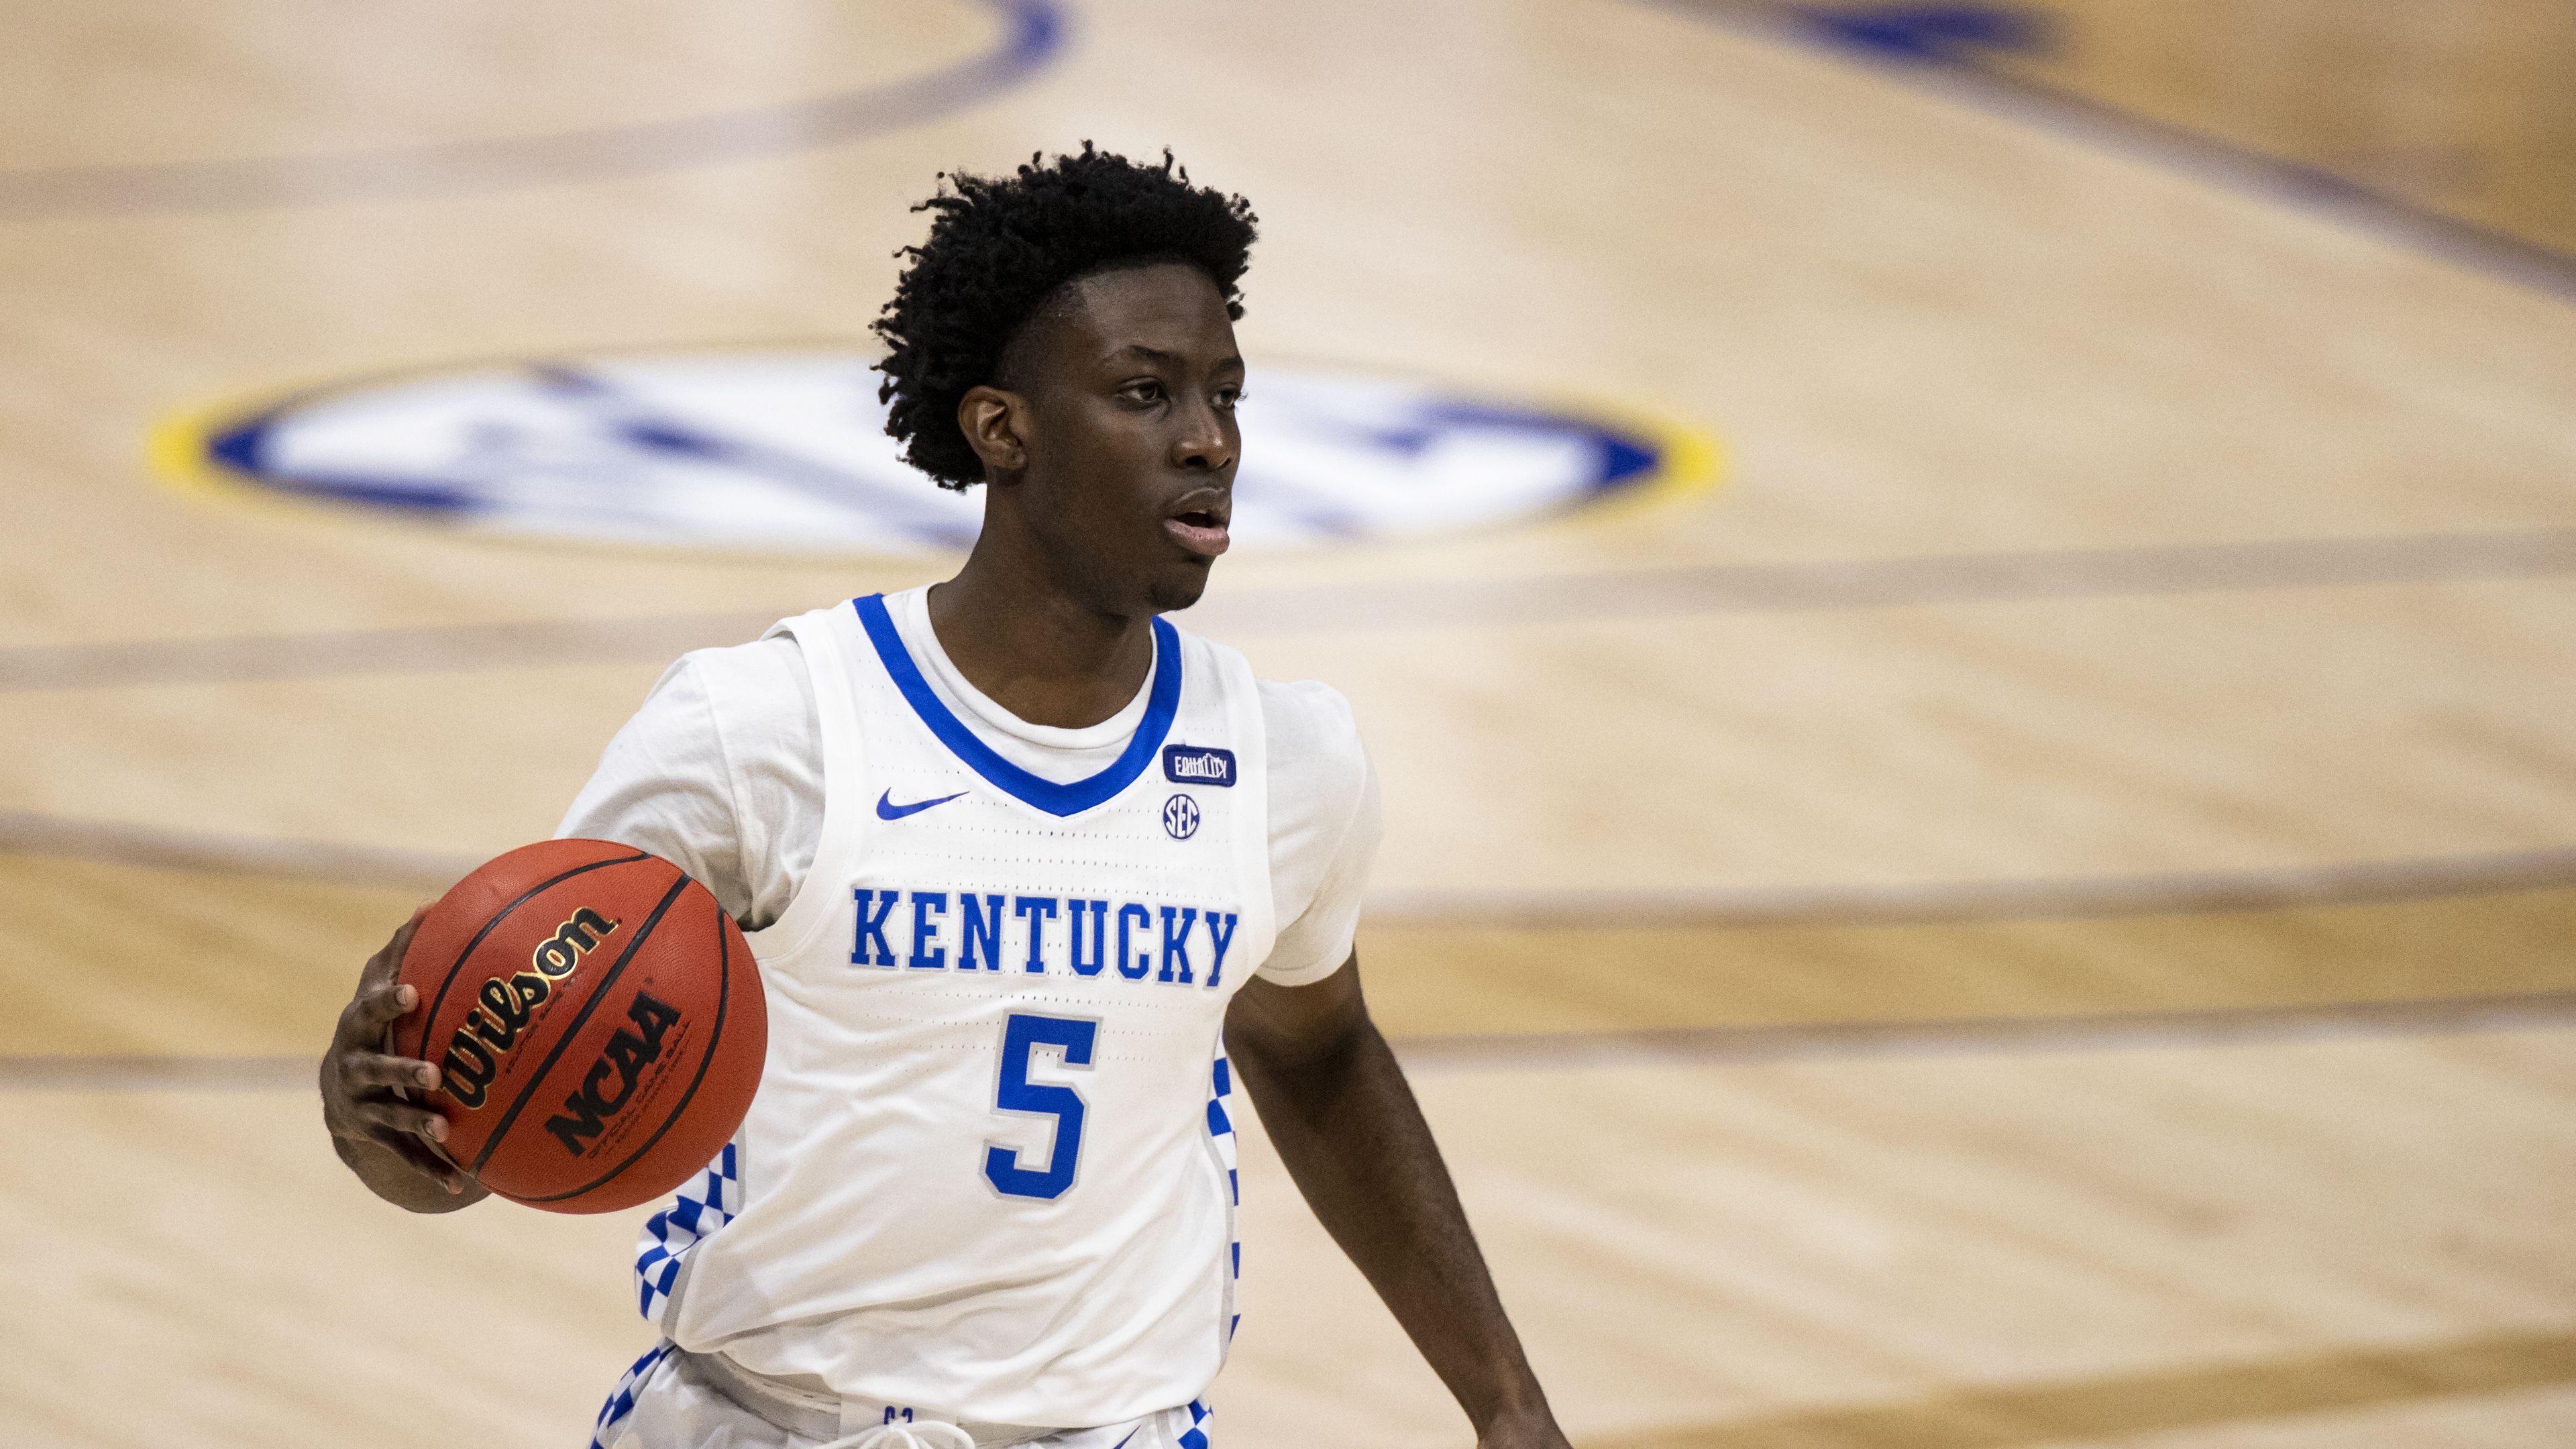 NBA prospect and former Kentucky guard Terrence Clarke dies in car crash
